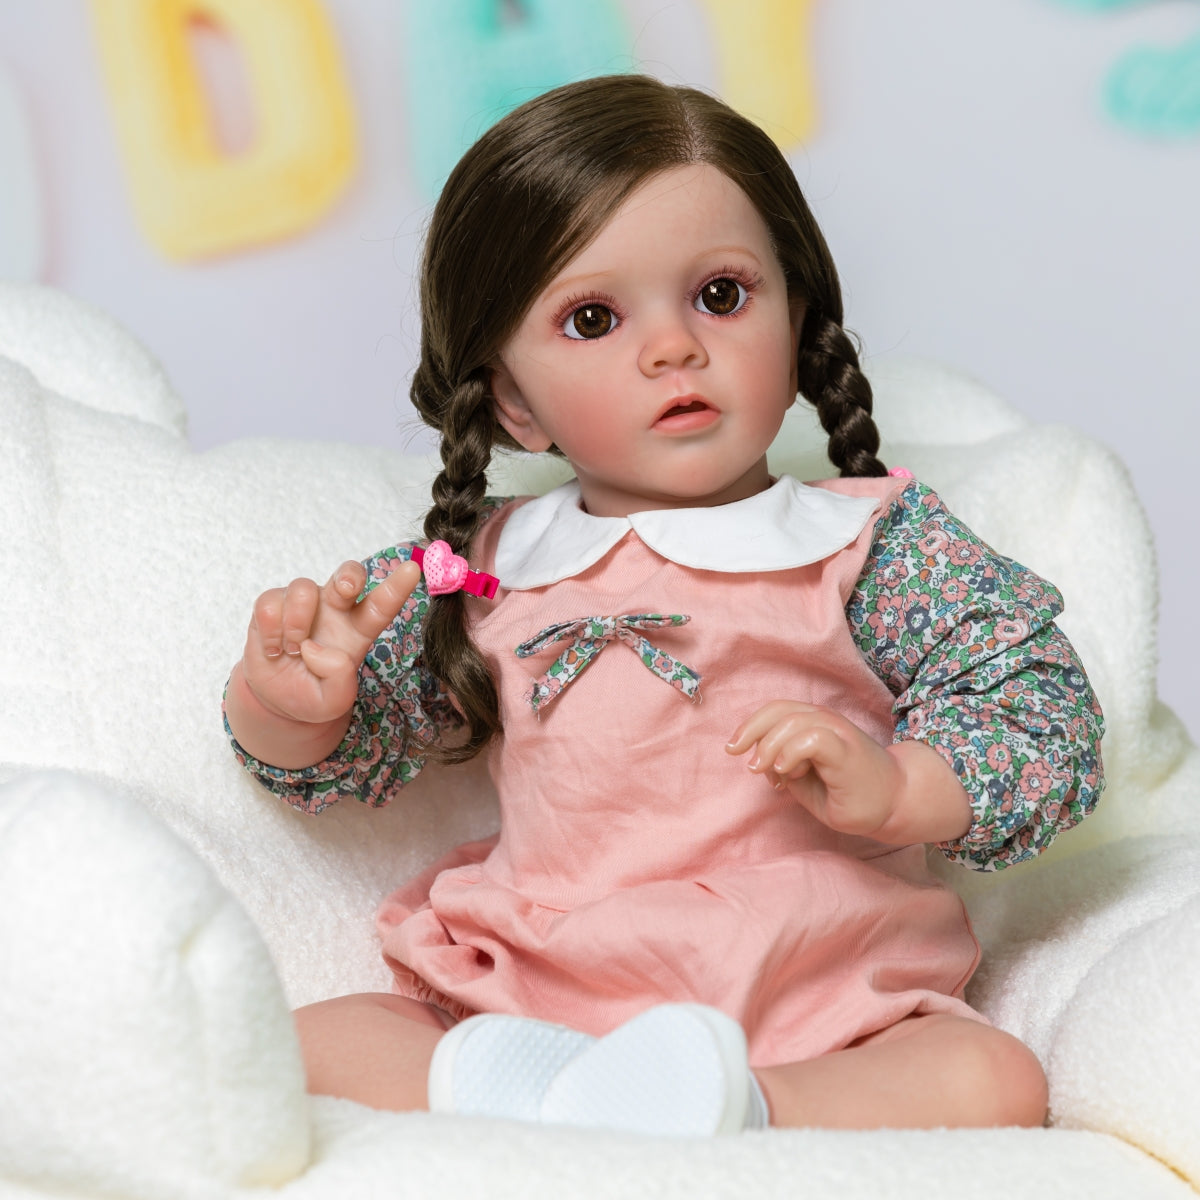 Beautiful Long Hair Princess Girls Lifelike Reborn Toddler Dolls That Look Real 60CM Weighted Soft Cloth Realistic Baby Dolls Real Life Baby Visible Veins High Quality Collectible Art Doll Toys Gift For 3+ Year Old